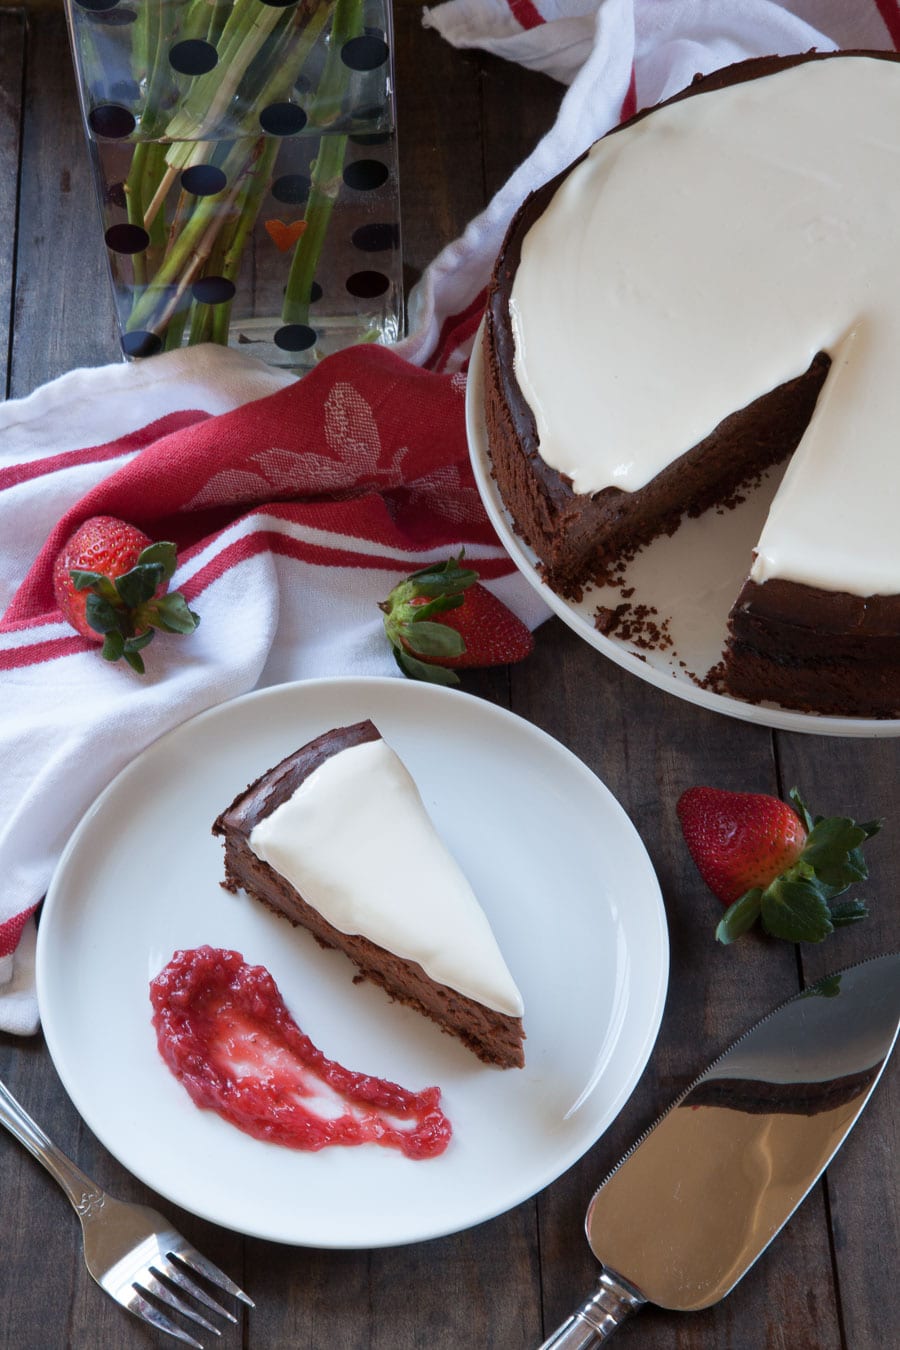 Chocolate Strawberry Cheesecake. Photo and recipe by Irvin Lin of Eat the Love.